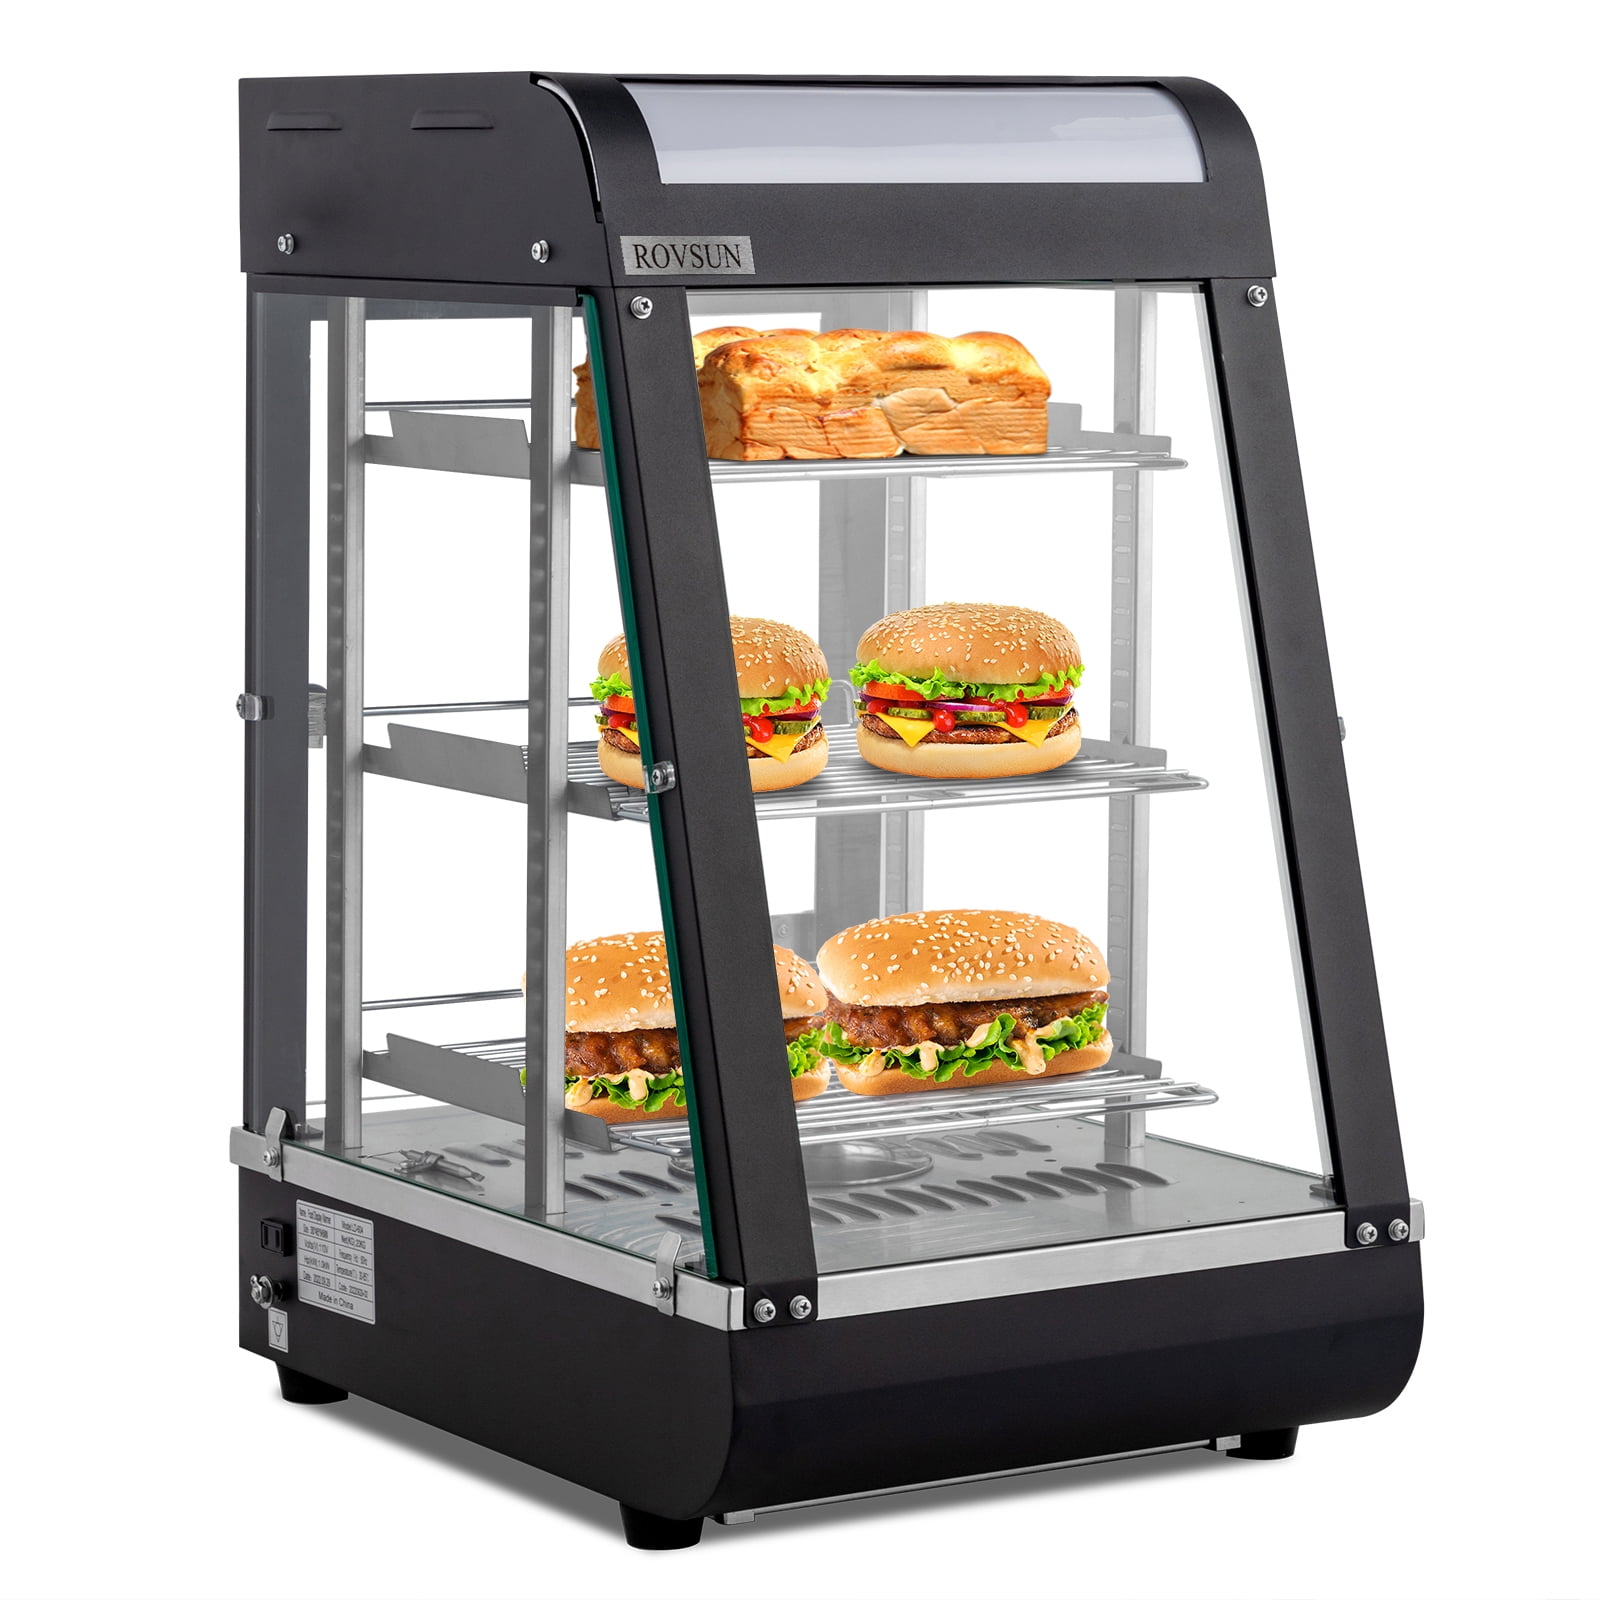 Commercial Electric Hot Glass Food Warmer Display Showcase For Sale - Buy  Food Warmer Display,Commercial Food Warmer Display Showcase,Food Warmer